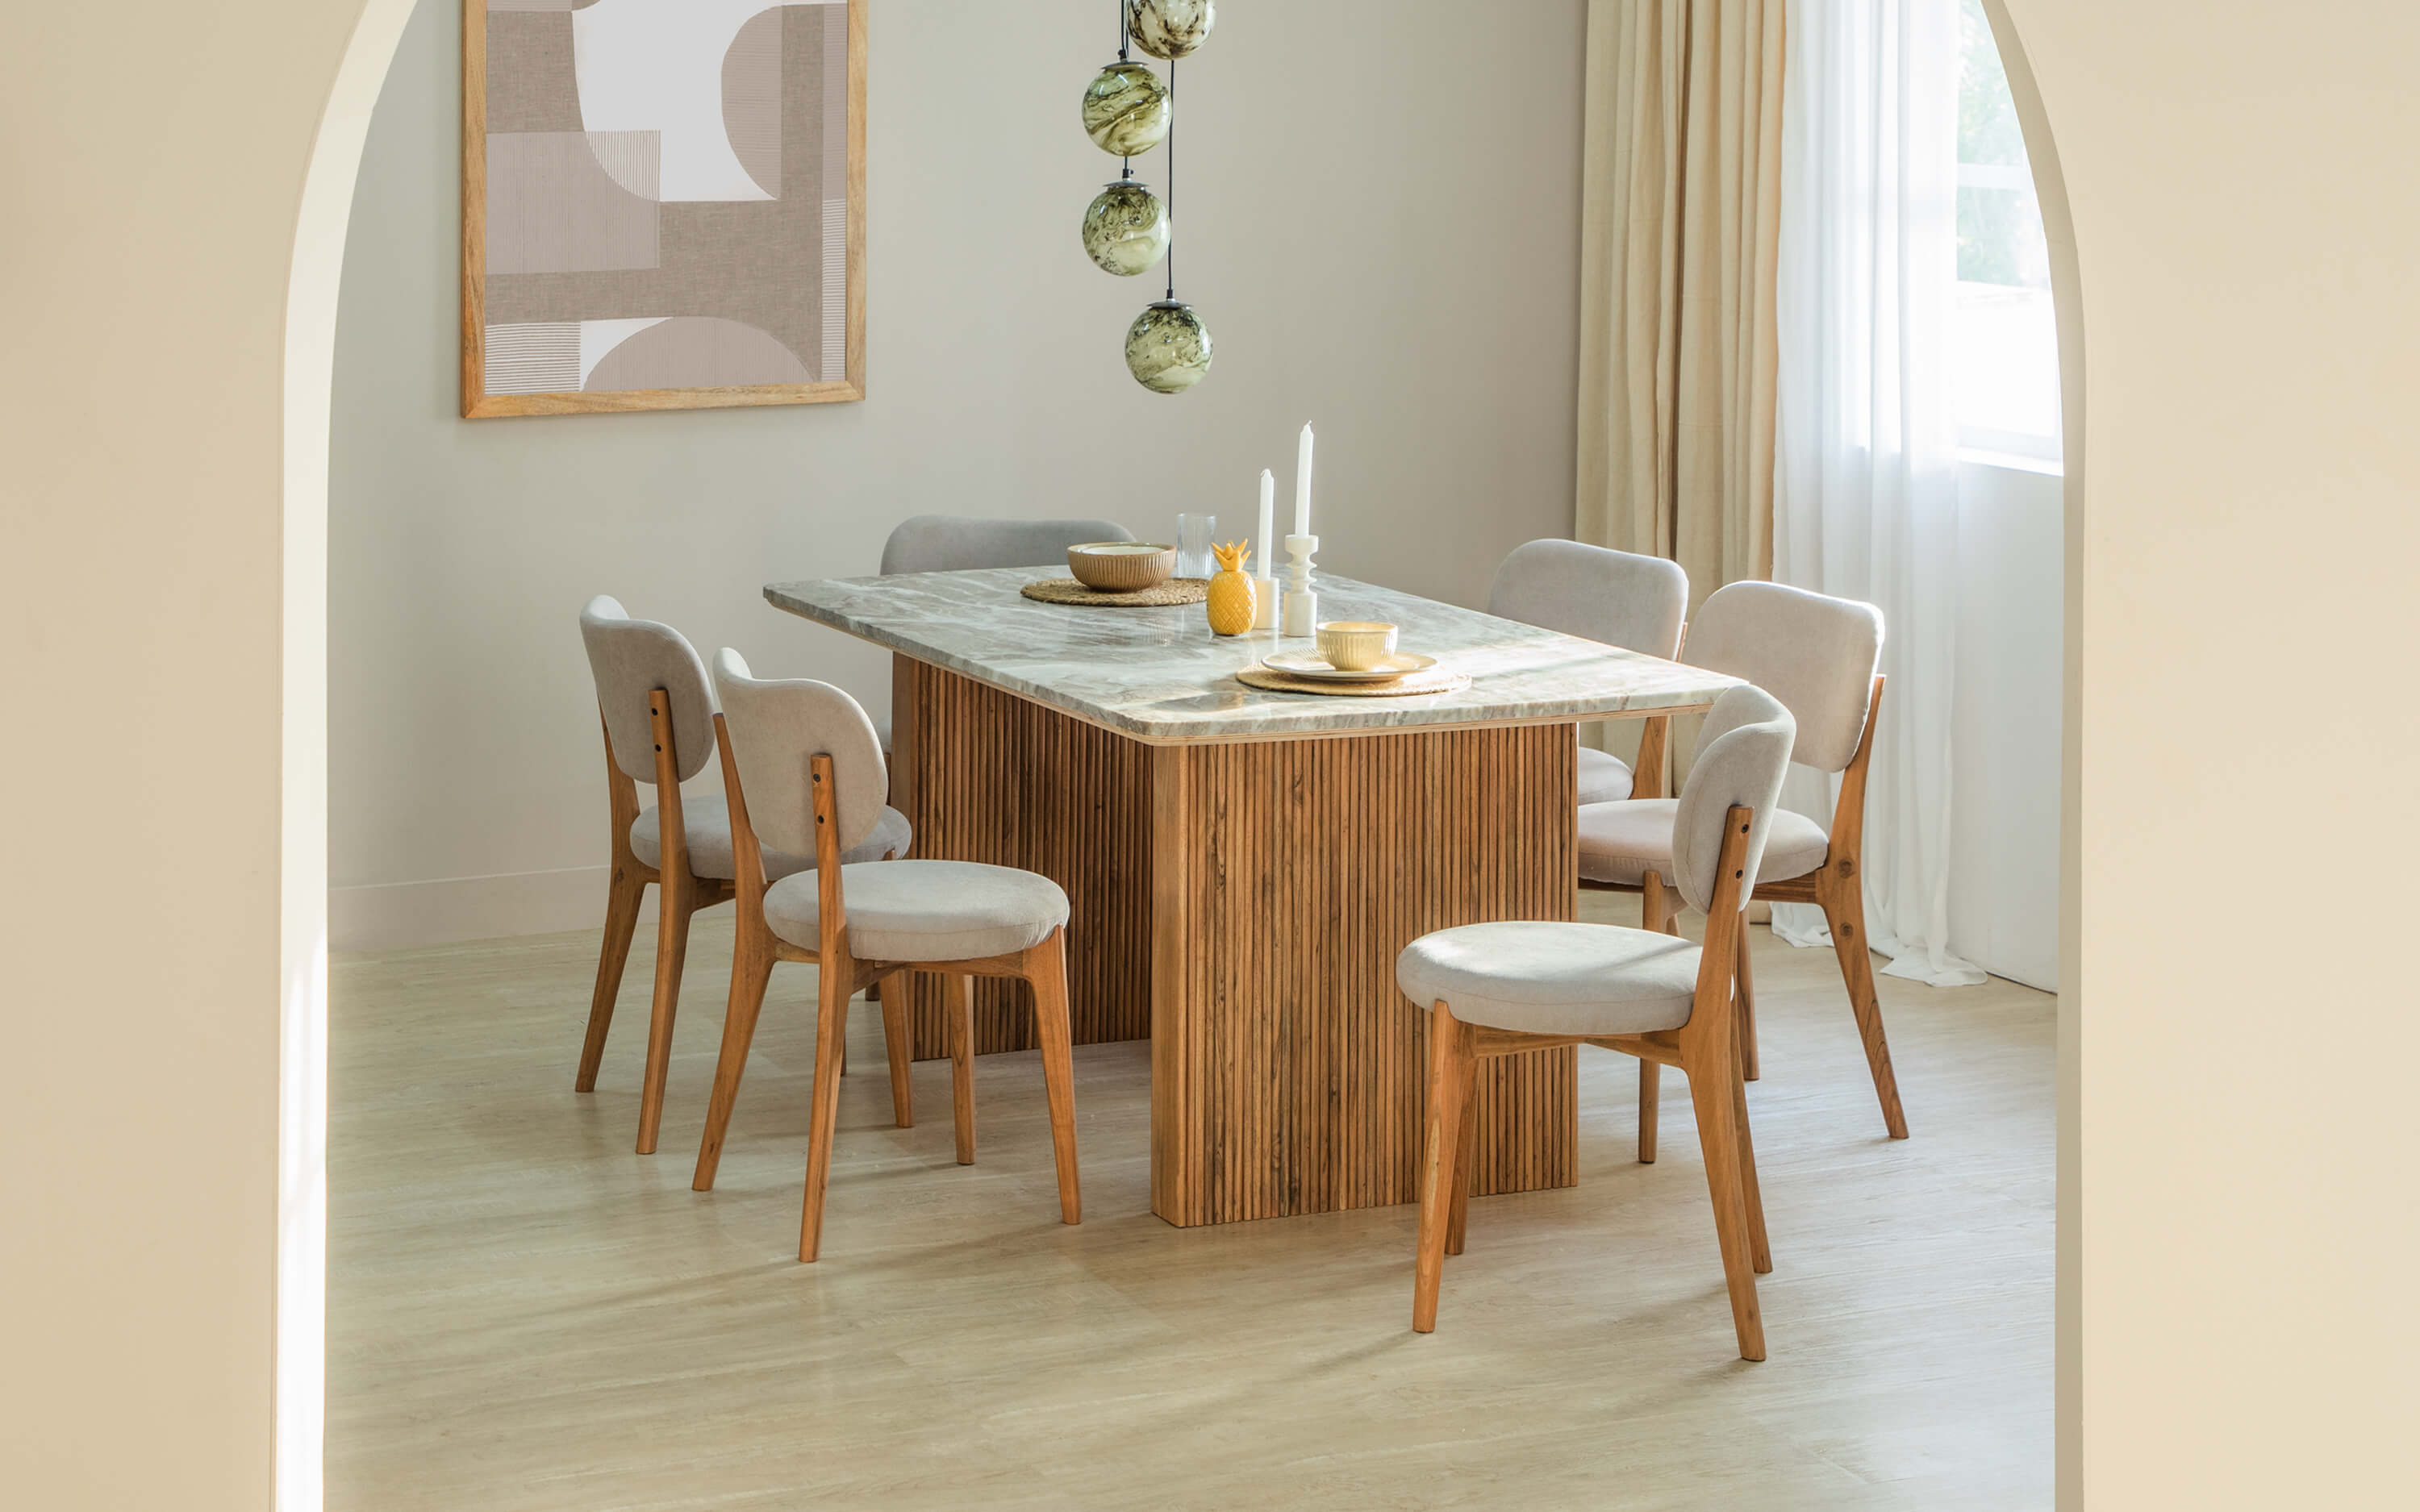 New Hiro marble top Dining Table set design With 6 upholstered Chairs